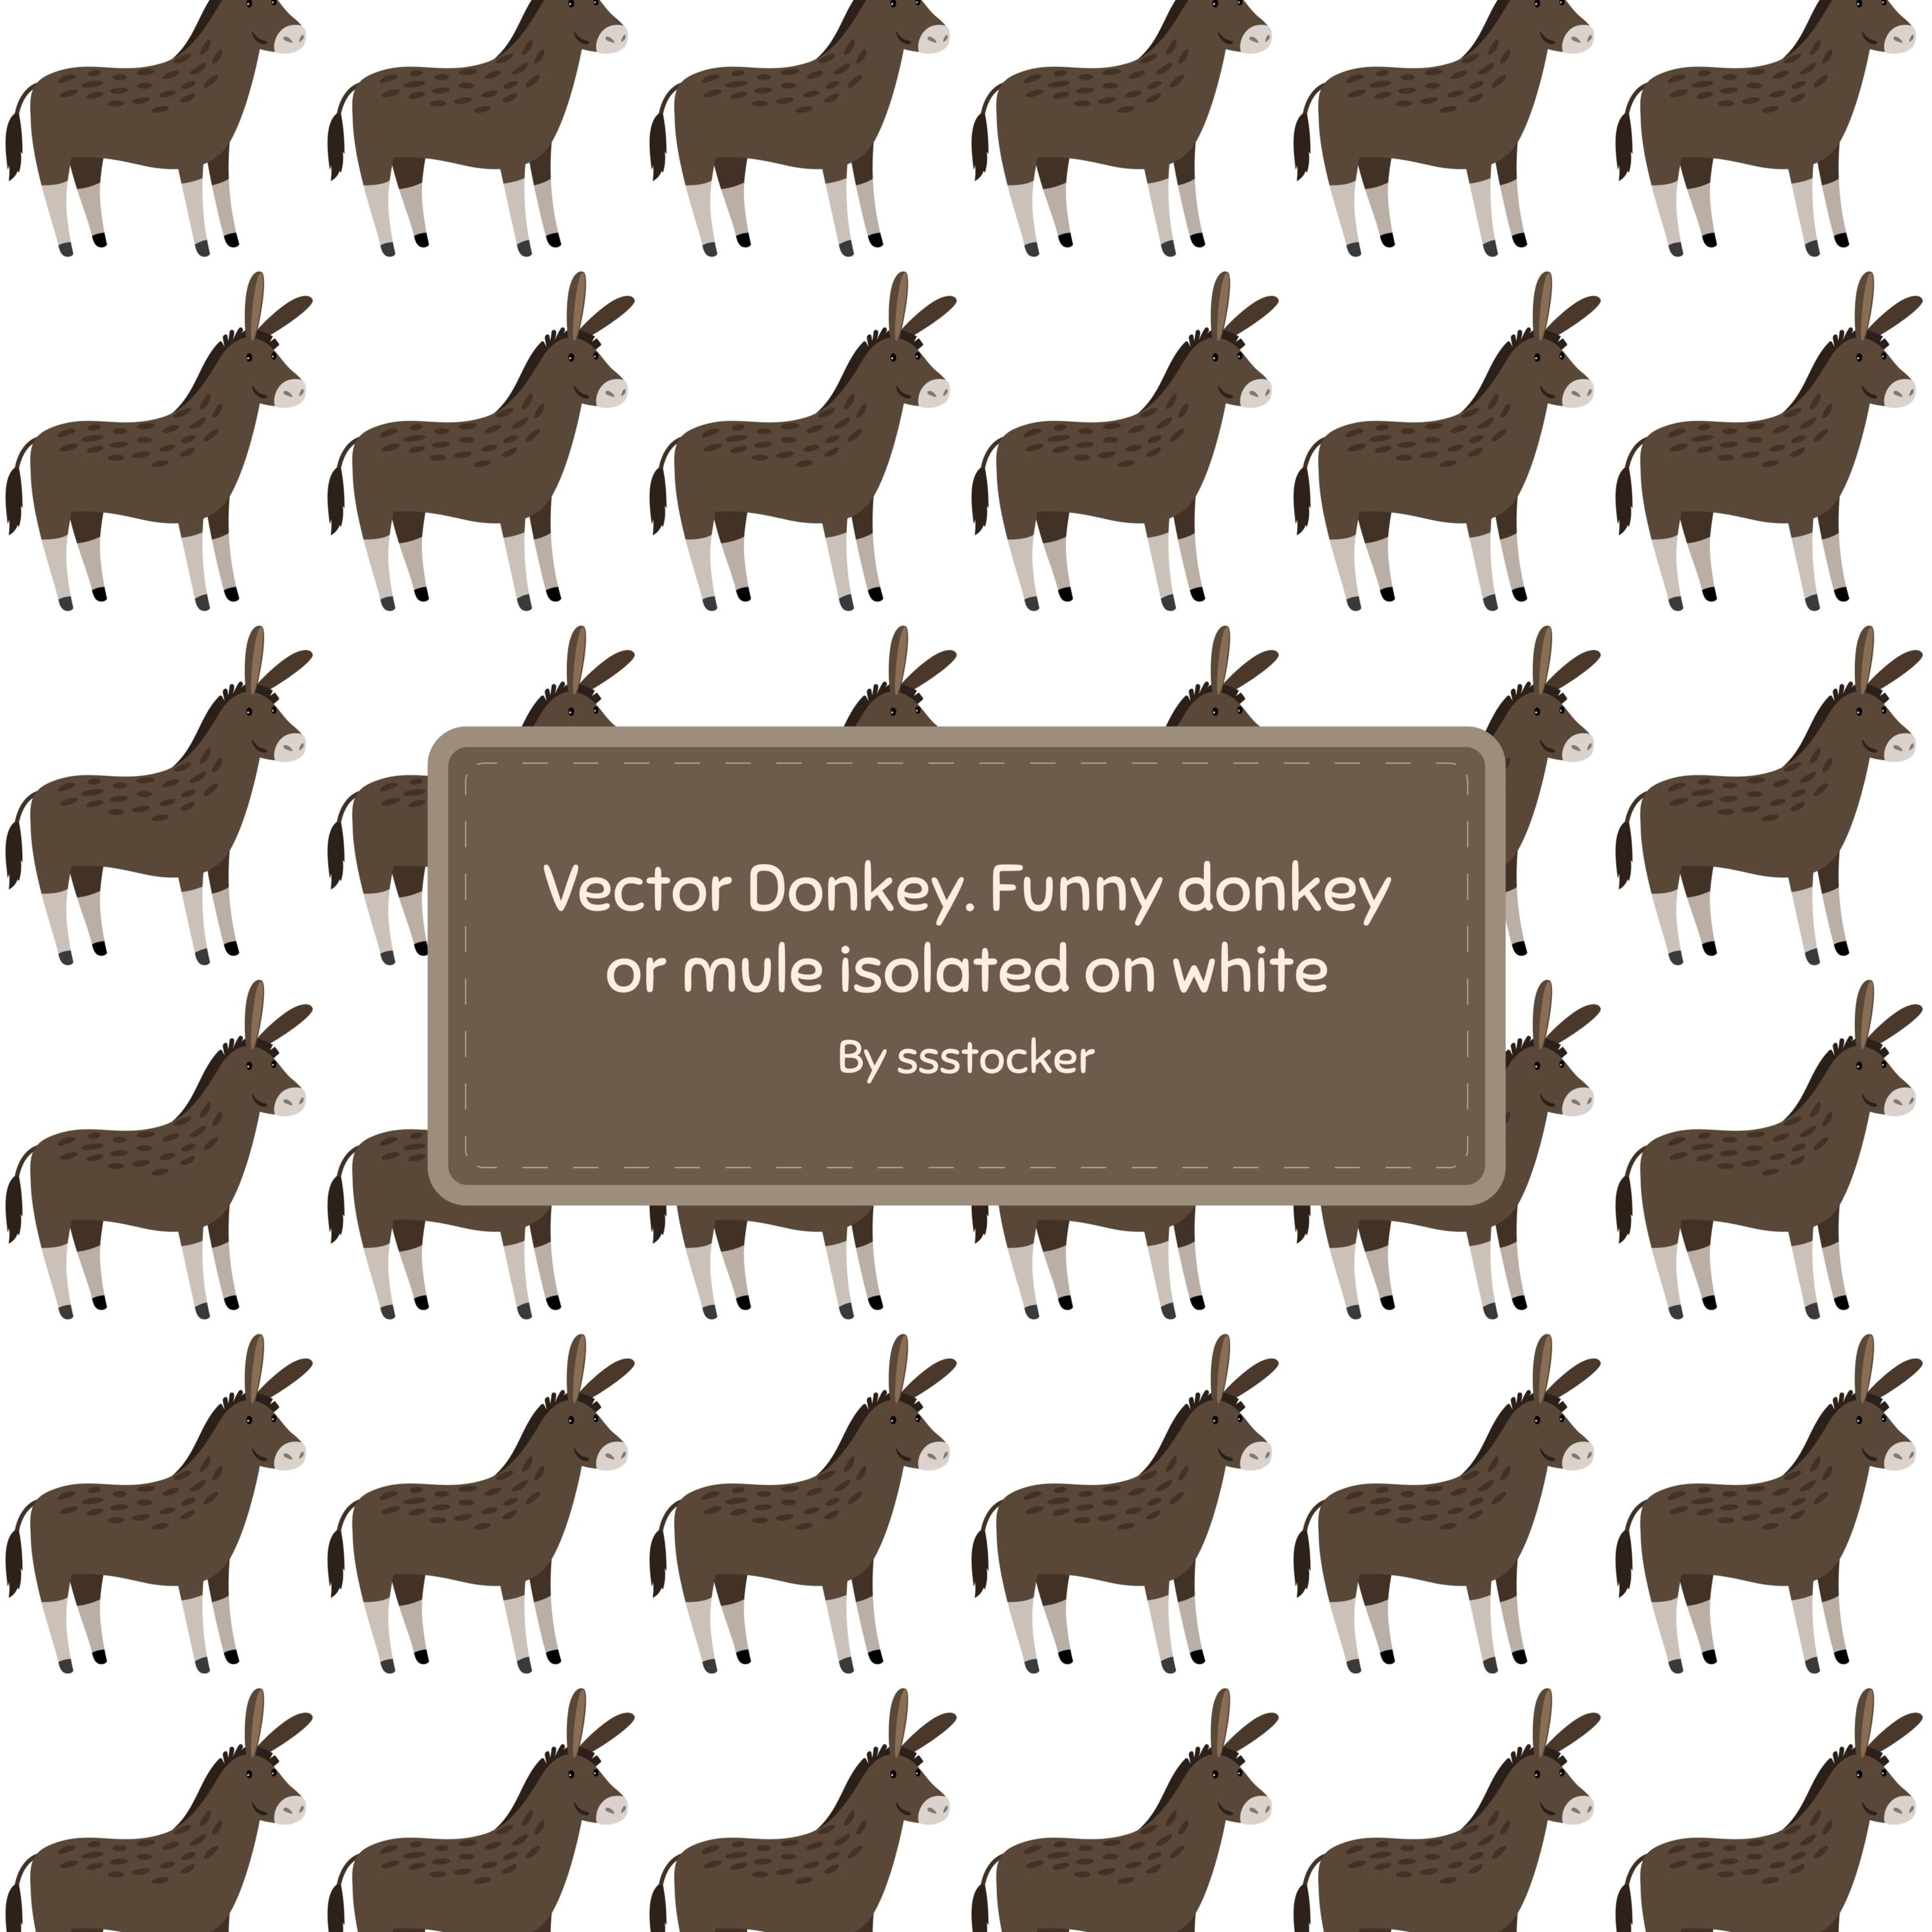 Vector Donkey. Funny donkey or mule isolated on white cover